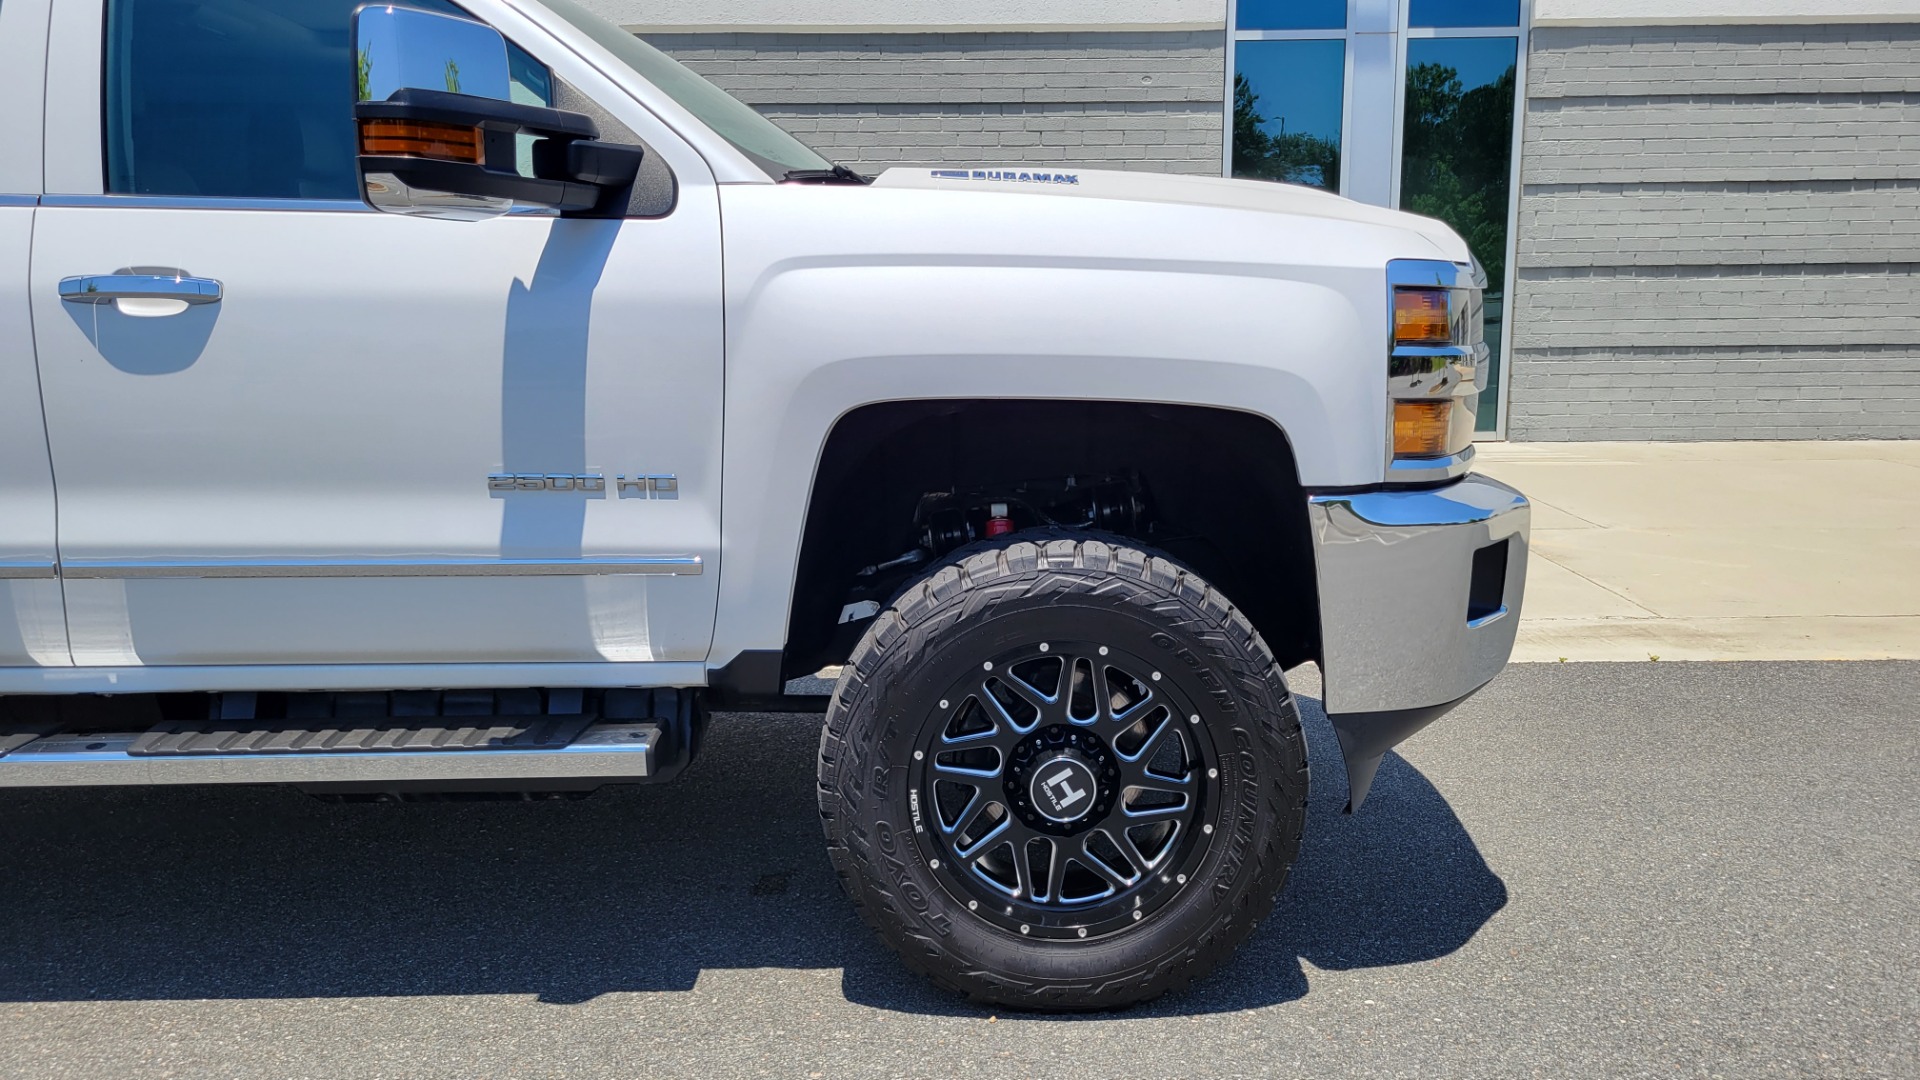 Used 2018 Chevrolet SILVERADO 2500HD LTZ CREWCAB / 6.6L / NAV / SUNROOF / BOSE / 5TH WHL / REARVIEW for sale Sold at Formula Imports in Charlotte NC 28227 101